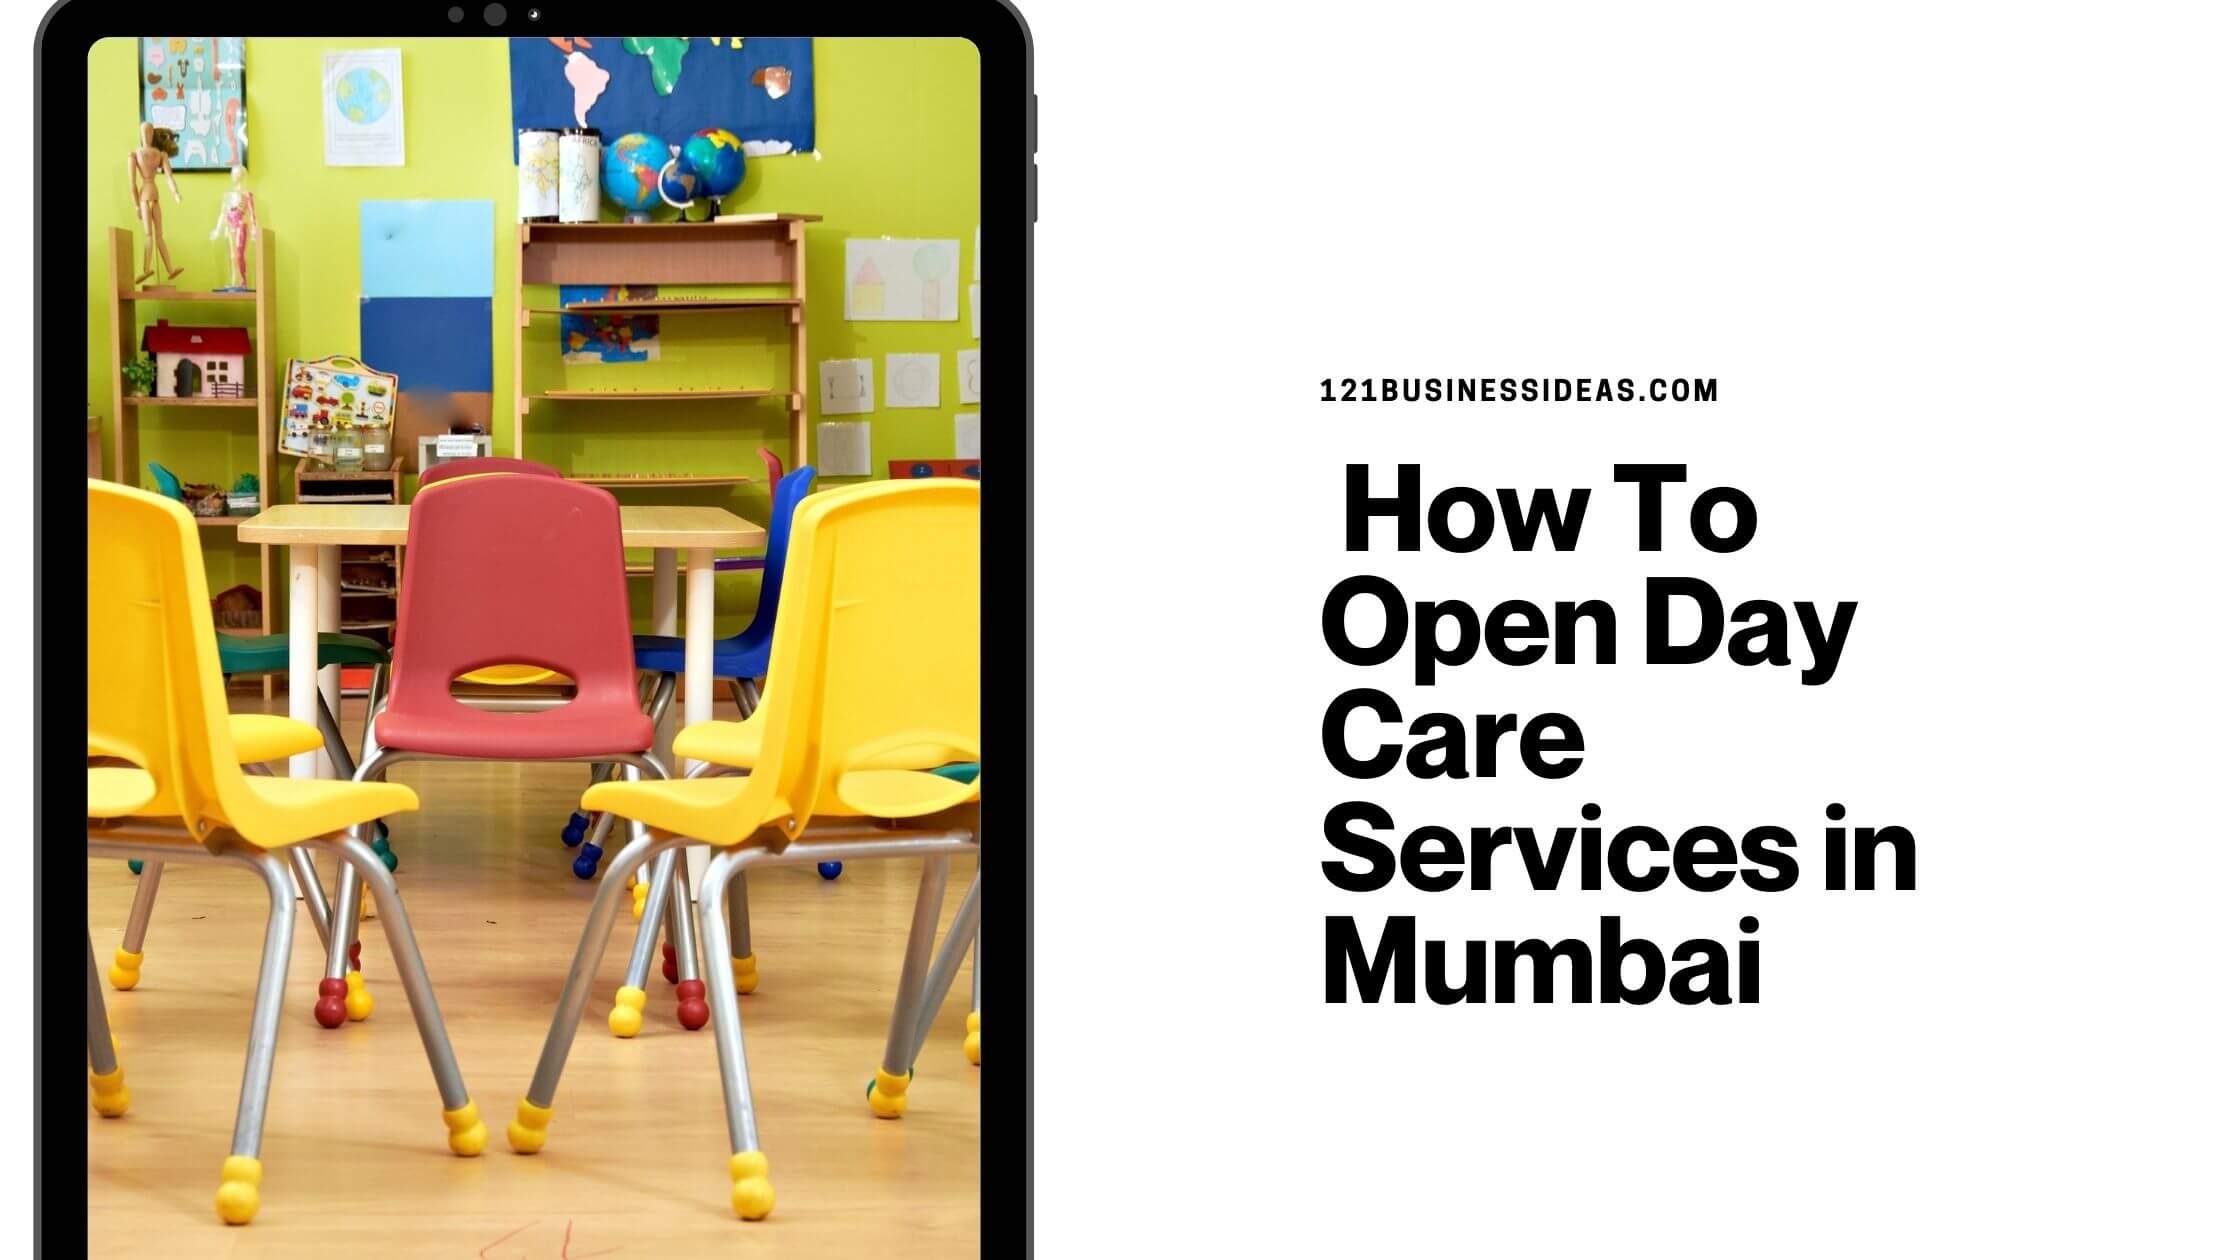 _How To Open Day Care Services in Mumbai